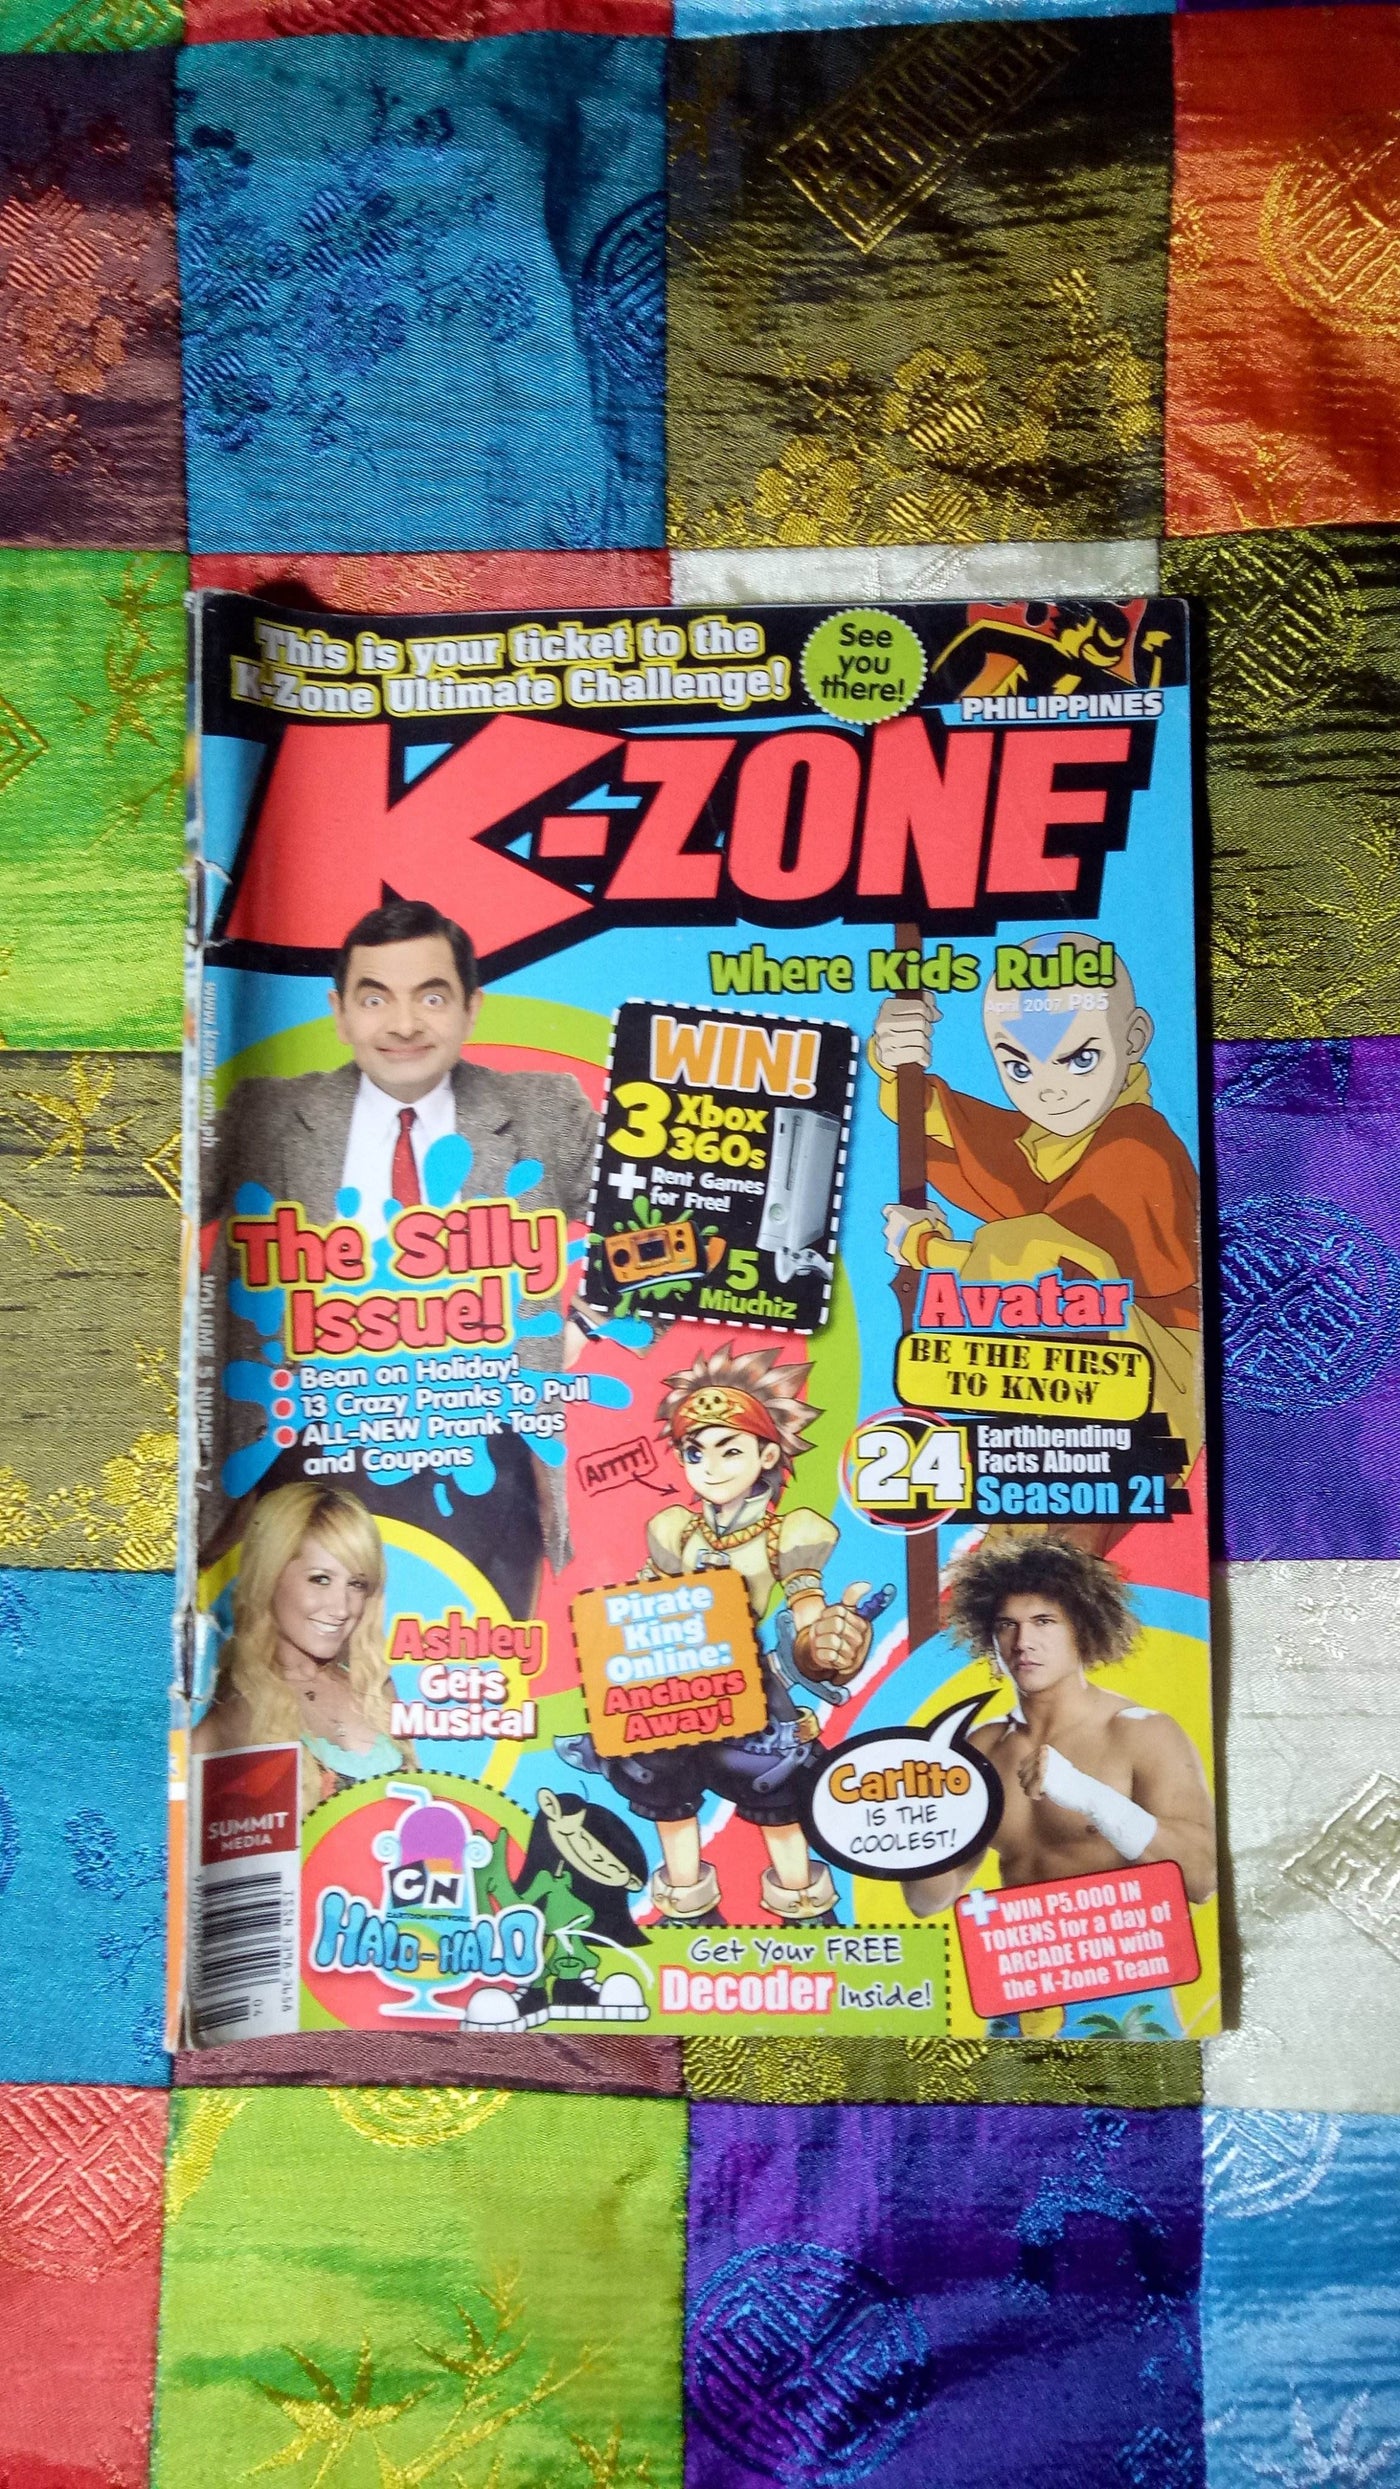 K Zone Vol 5 Number 7 April 07 Issue By Summit Media Bookspine Ph